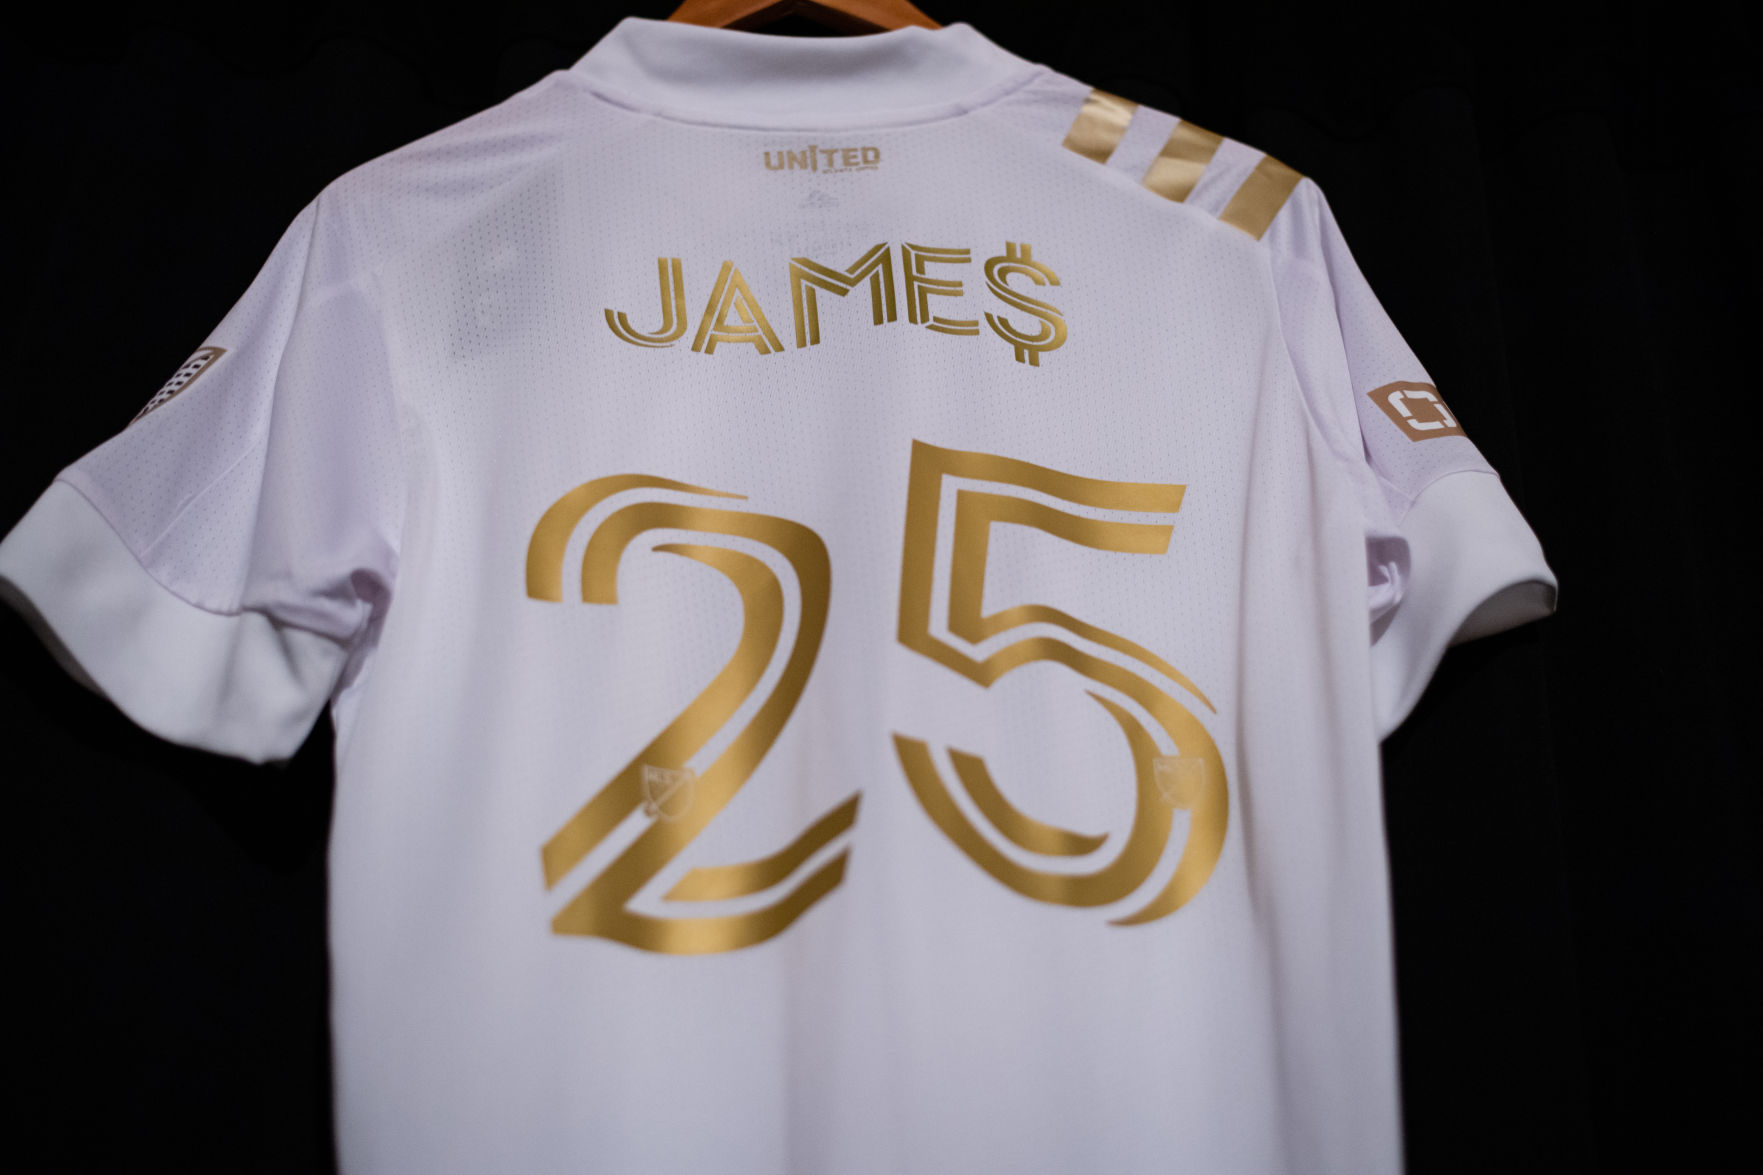 atlanta united white and gold jersey